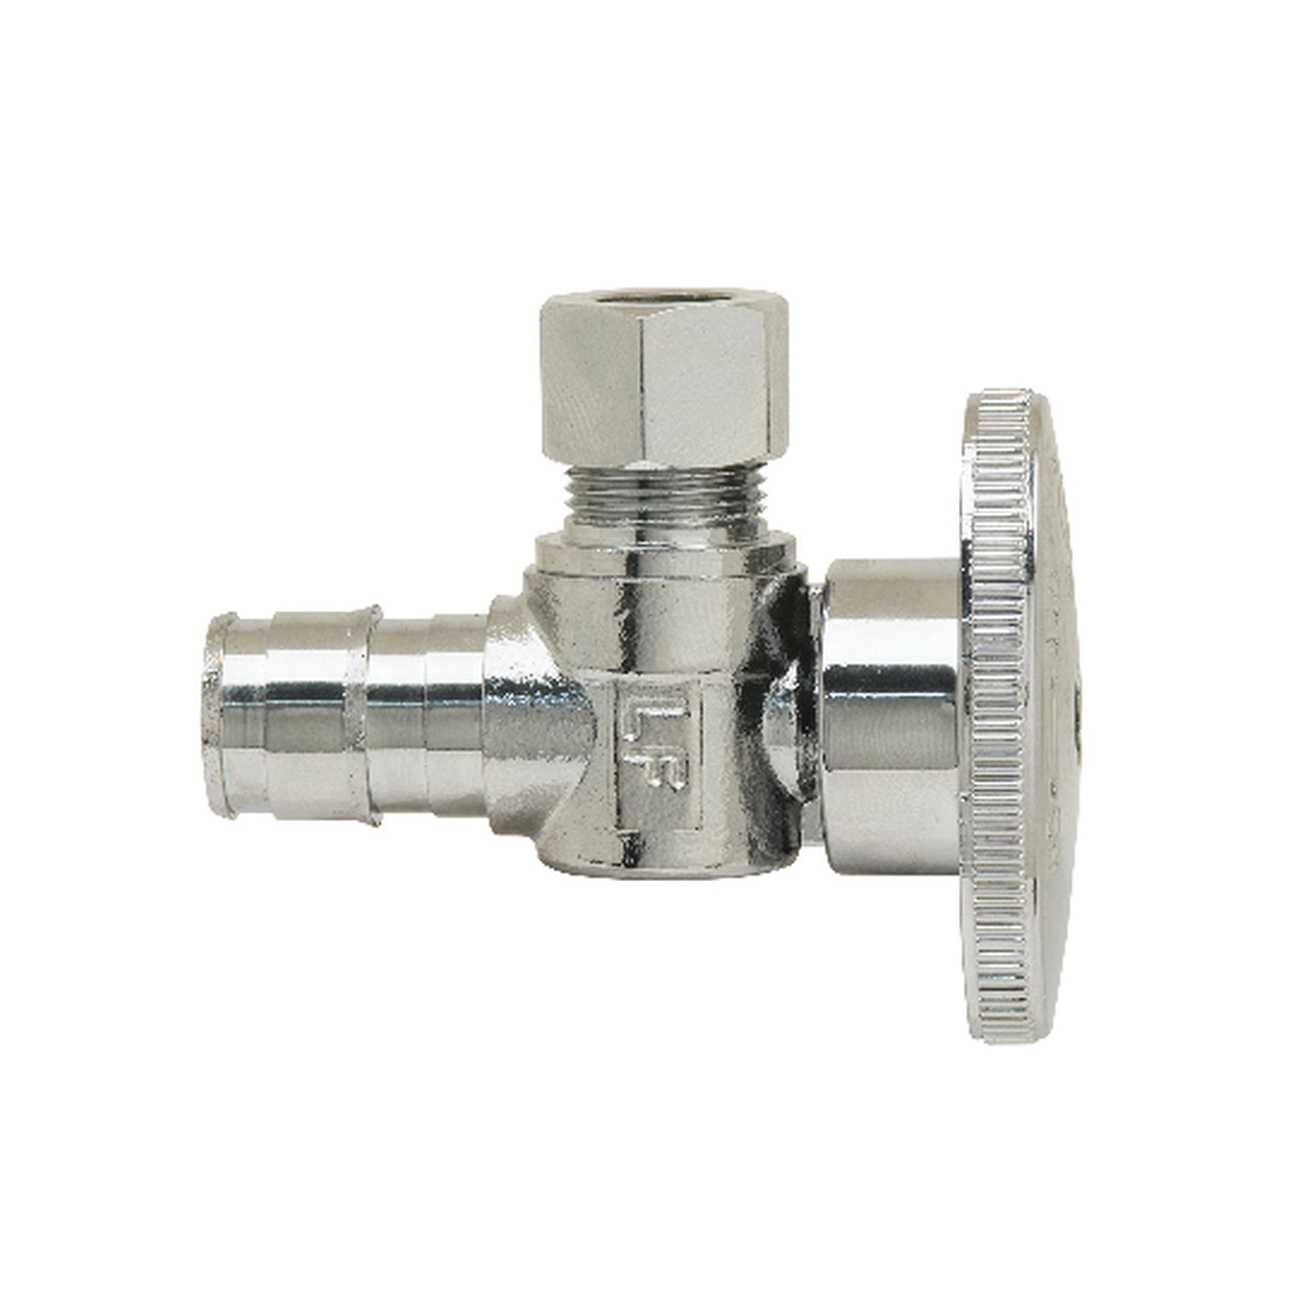 PlumbShop® RELIABLE VALUE™ PLB107X P Angle Style Quarter-Turn Supply Ball Stop, 1/2 x 3/8 in Nominal, Cold Expansion PEX Barb x OD Compression, 125 psi, Brass Body, Polished Chrome